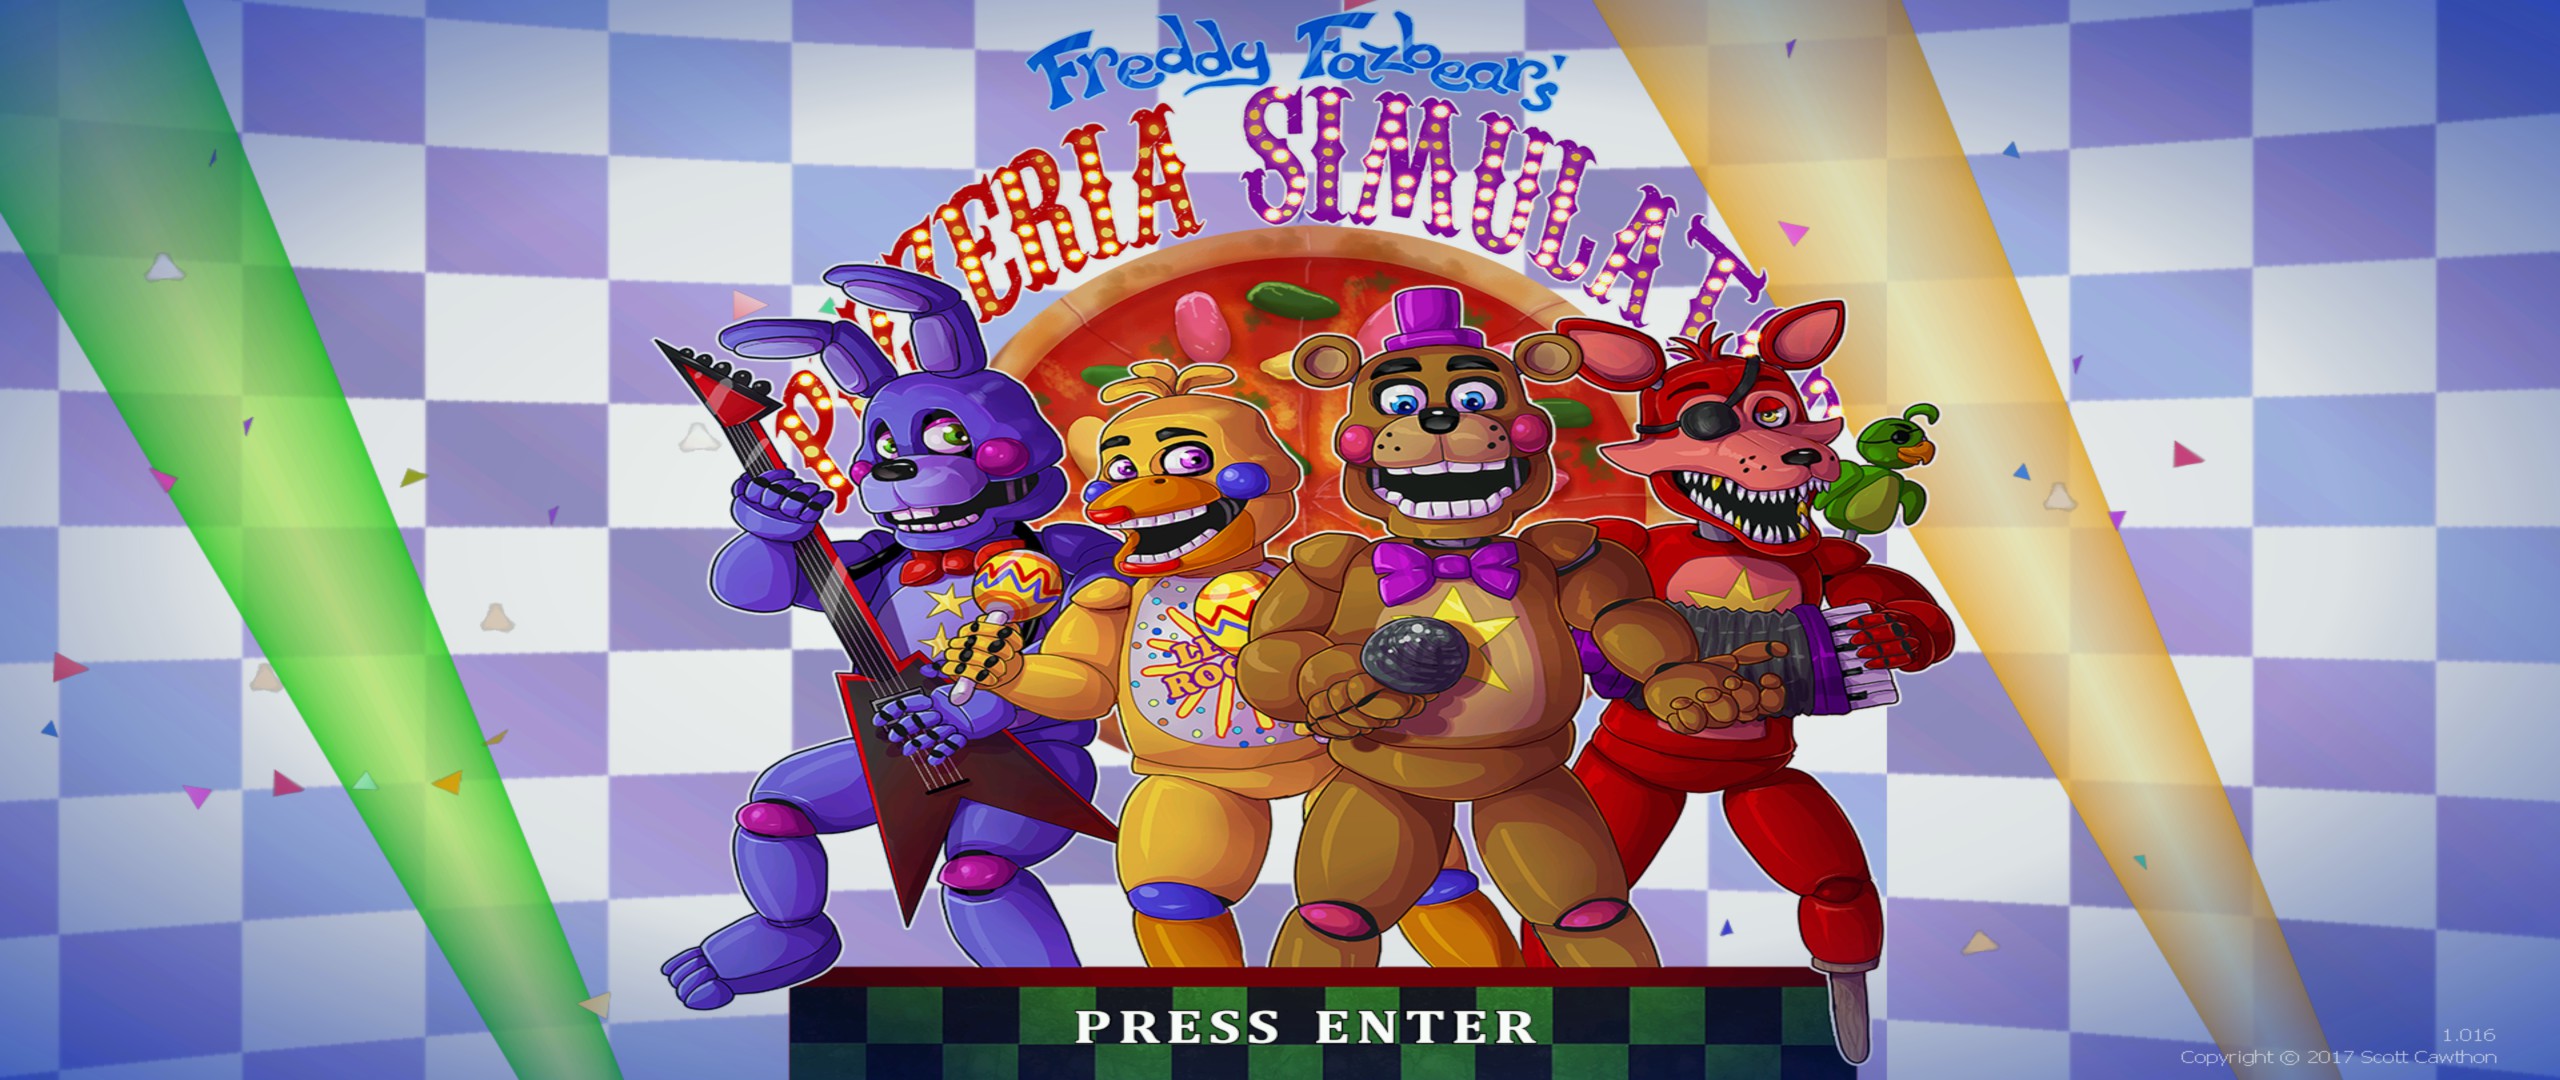 The New Five Nights At Freddy’s Game Is Not What It Seems